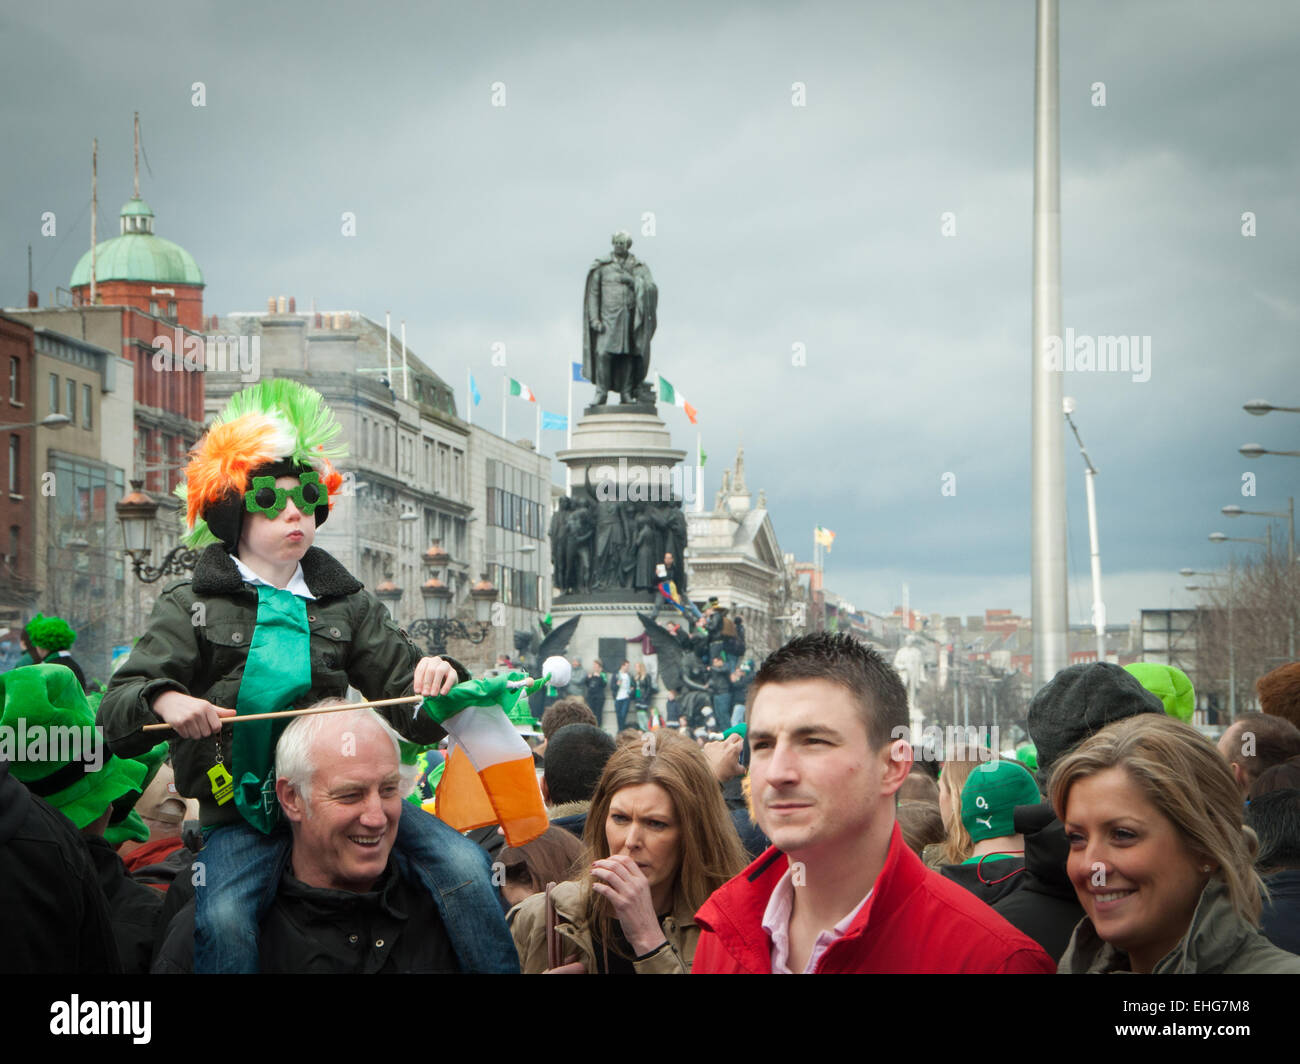 Young boy on father's shoulders has Irish wig, glasses and Irish flag on St Patrick's day in O'Connell Street Dublin Ireland Stock Photo